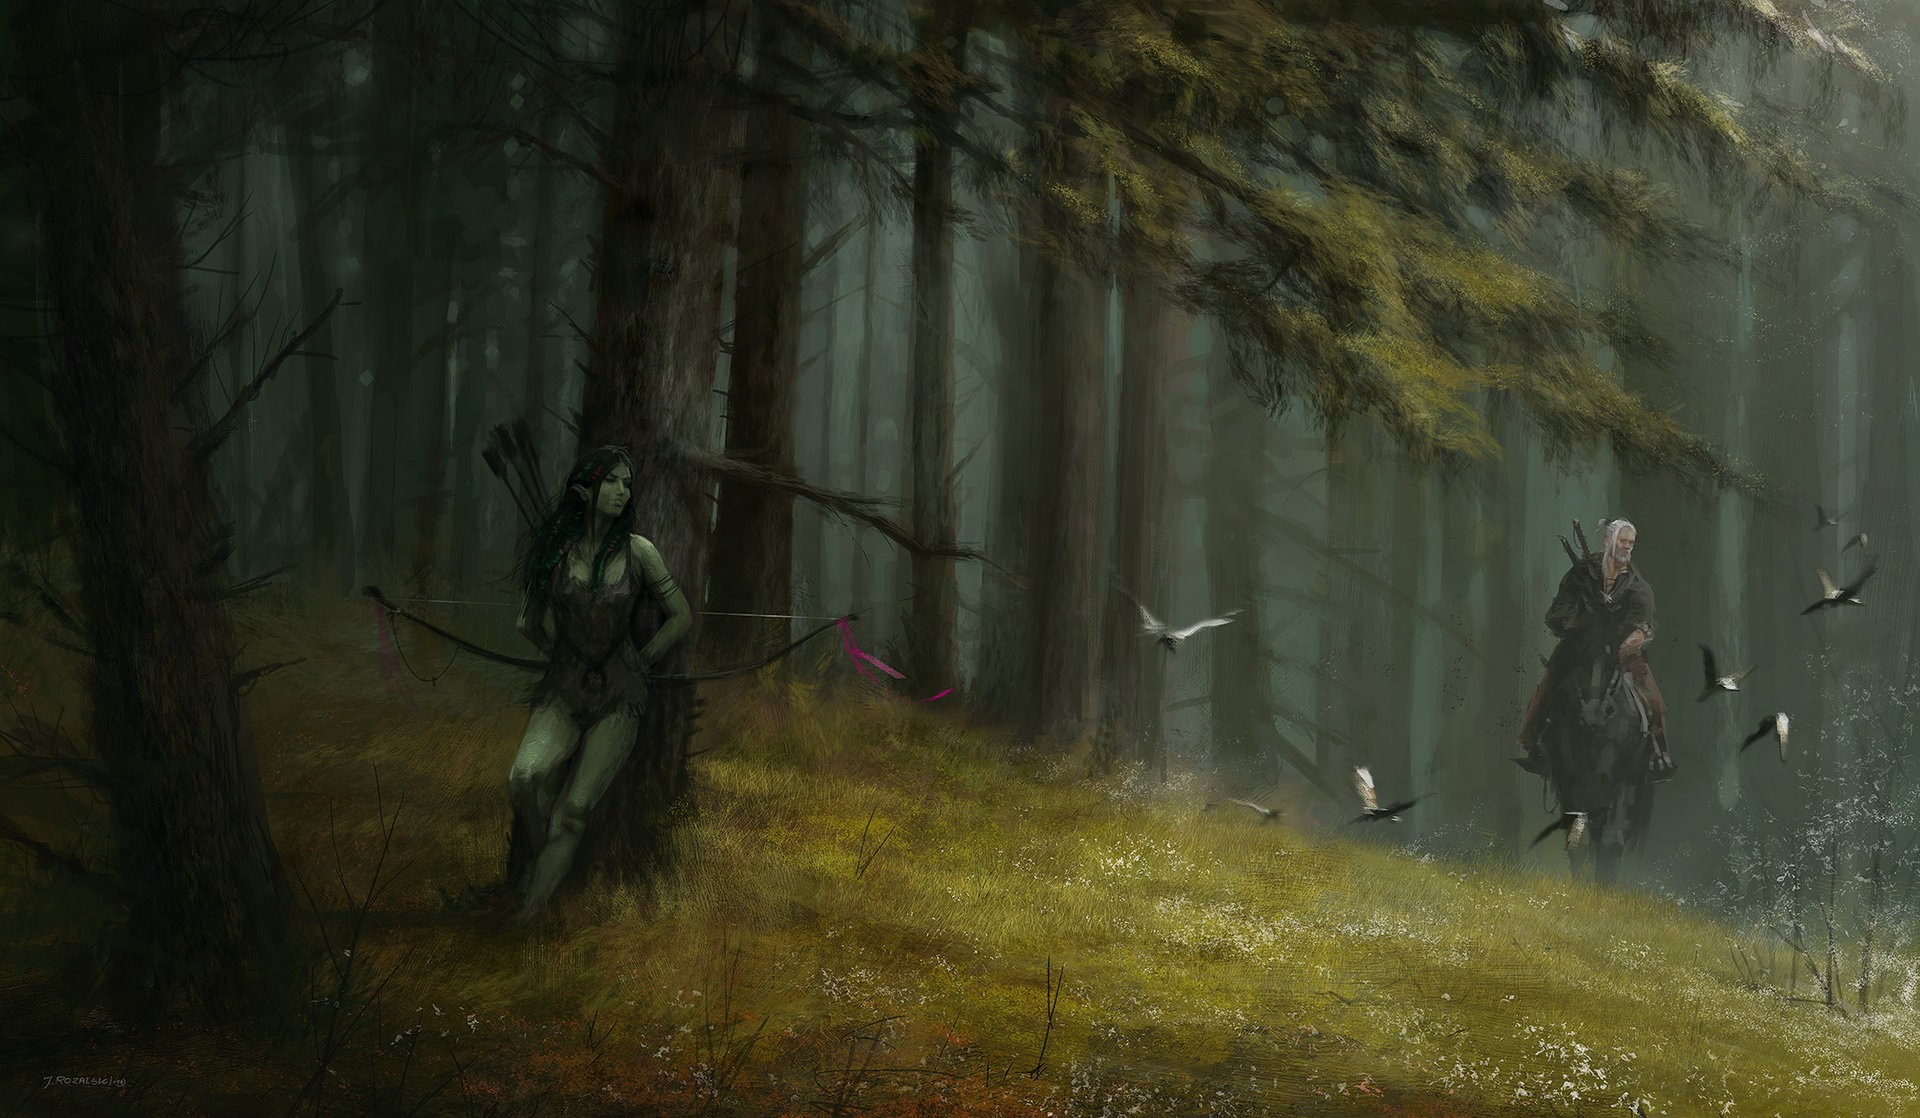 General 1920x1118 fantasy art forest The Witcher The Witcher 3: Wild Hunt RPG video games PC gaming video game art fantasy girl Geralt of Rivia bow and arrow